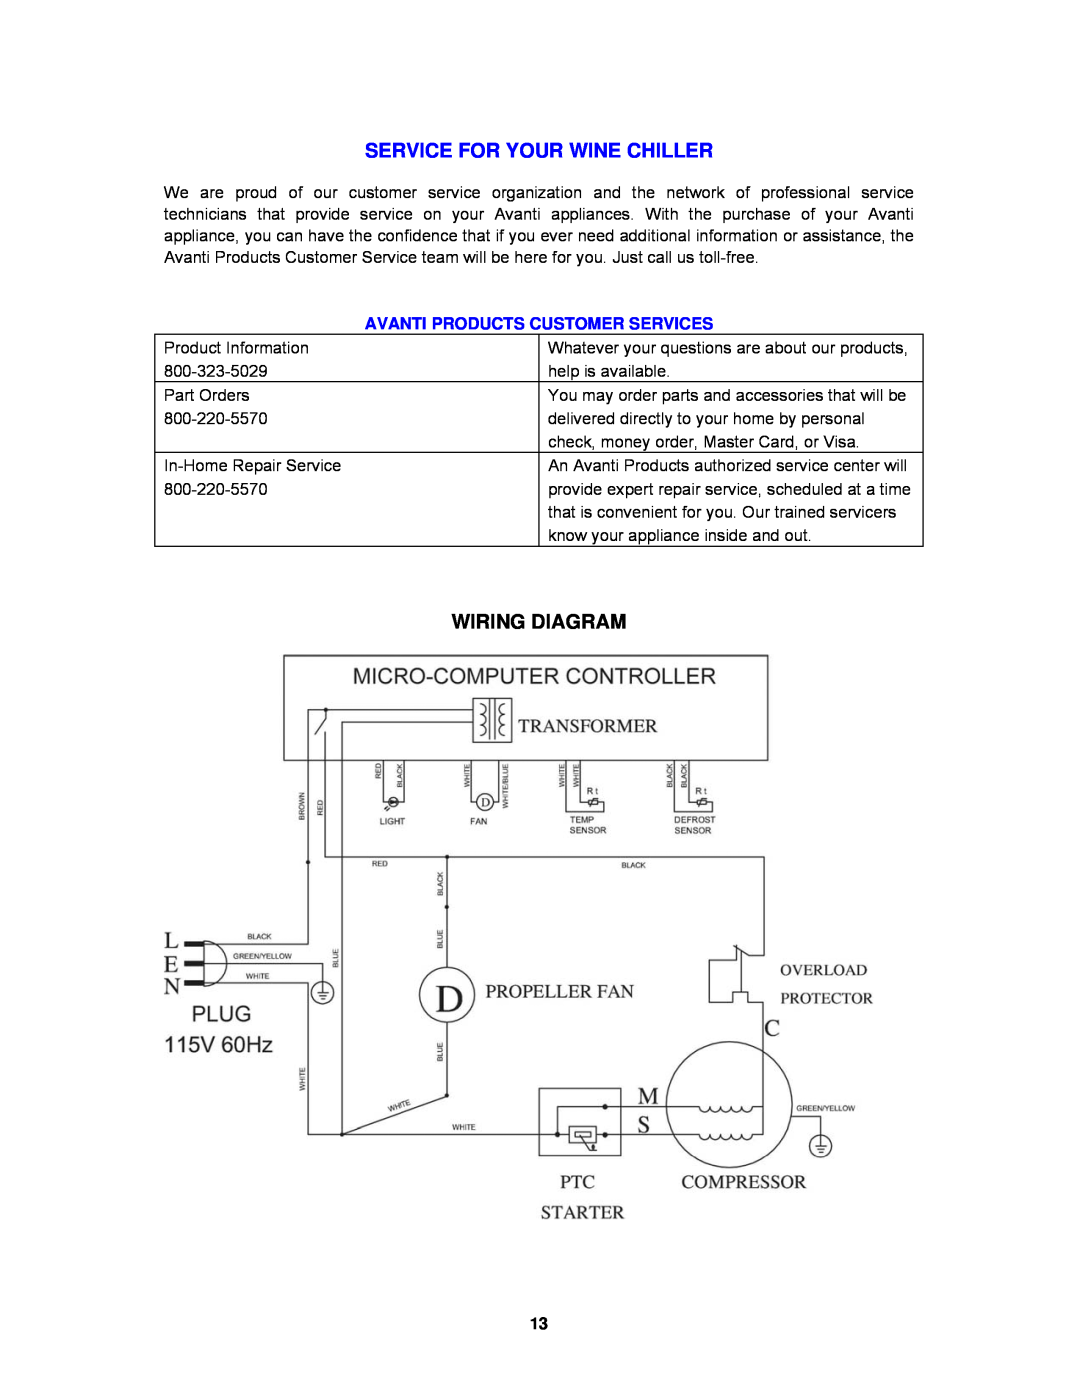 Avanti WC30SSR instruction manual Service For Your Wine Chiller, Wiring Diagram, Avanti Products Customer Services 